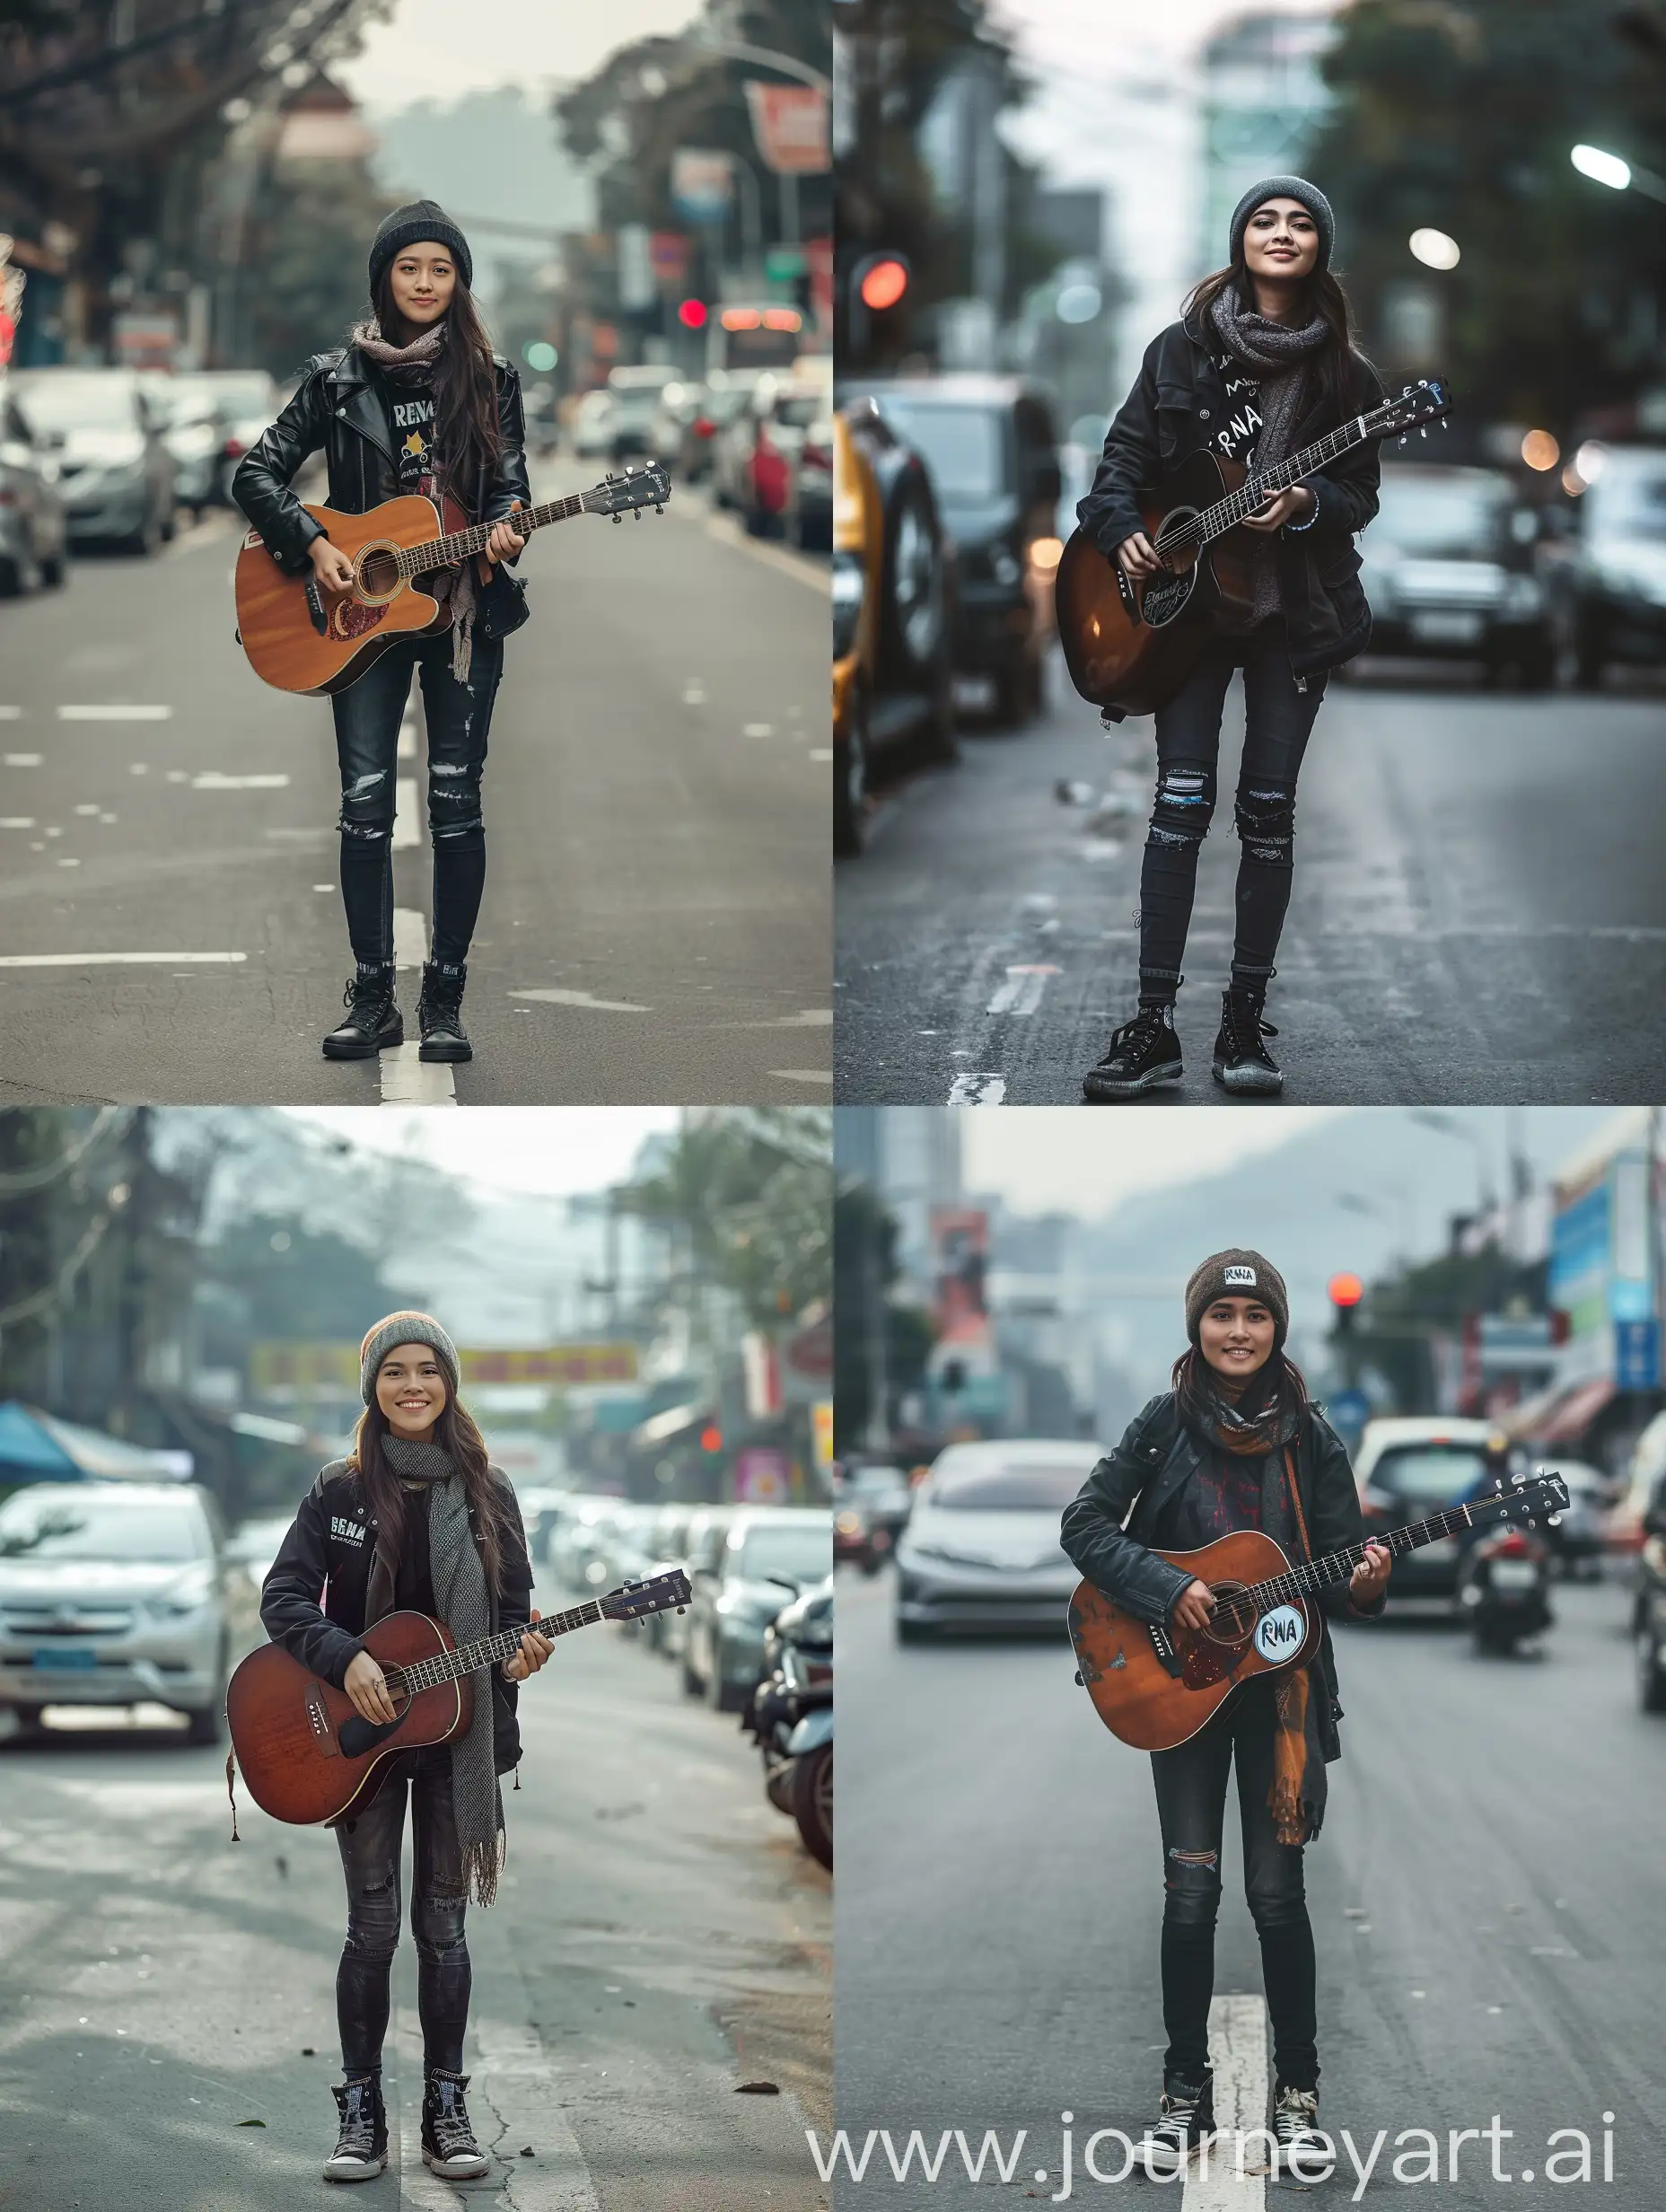 Indonesian-Woman-with-Guitar-Smiling-in-Urban-Traffic-Scene